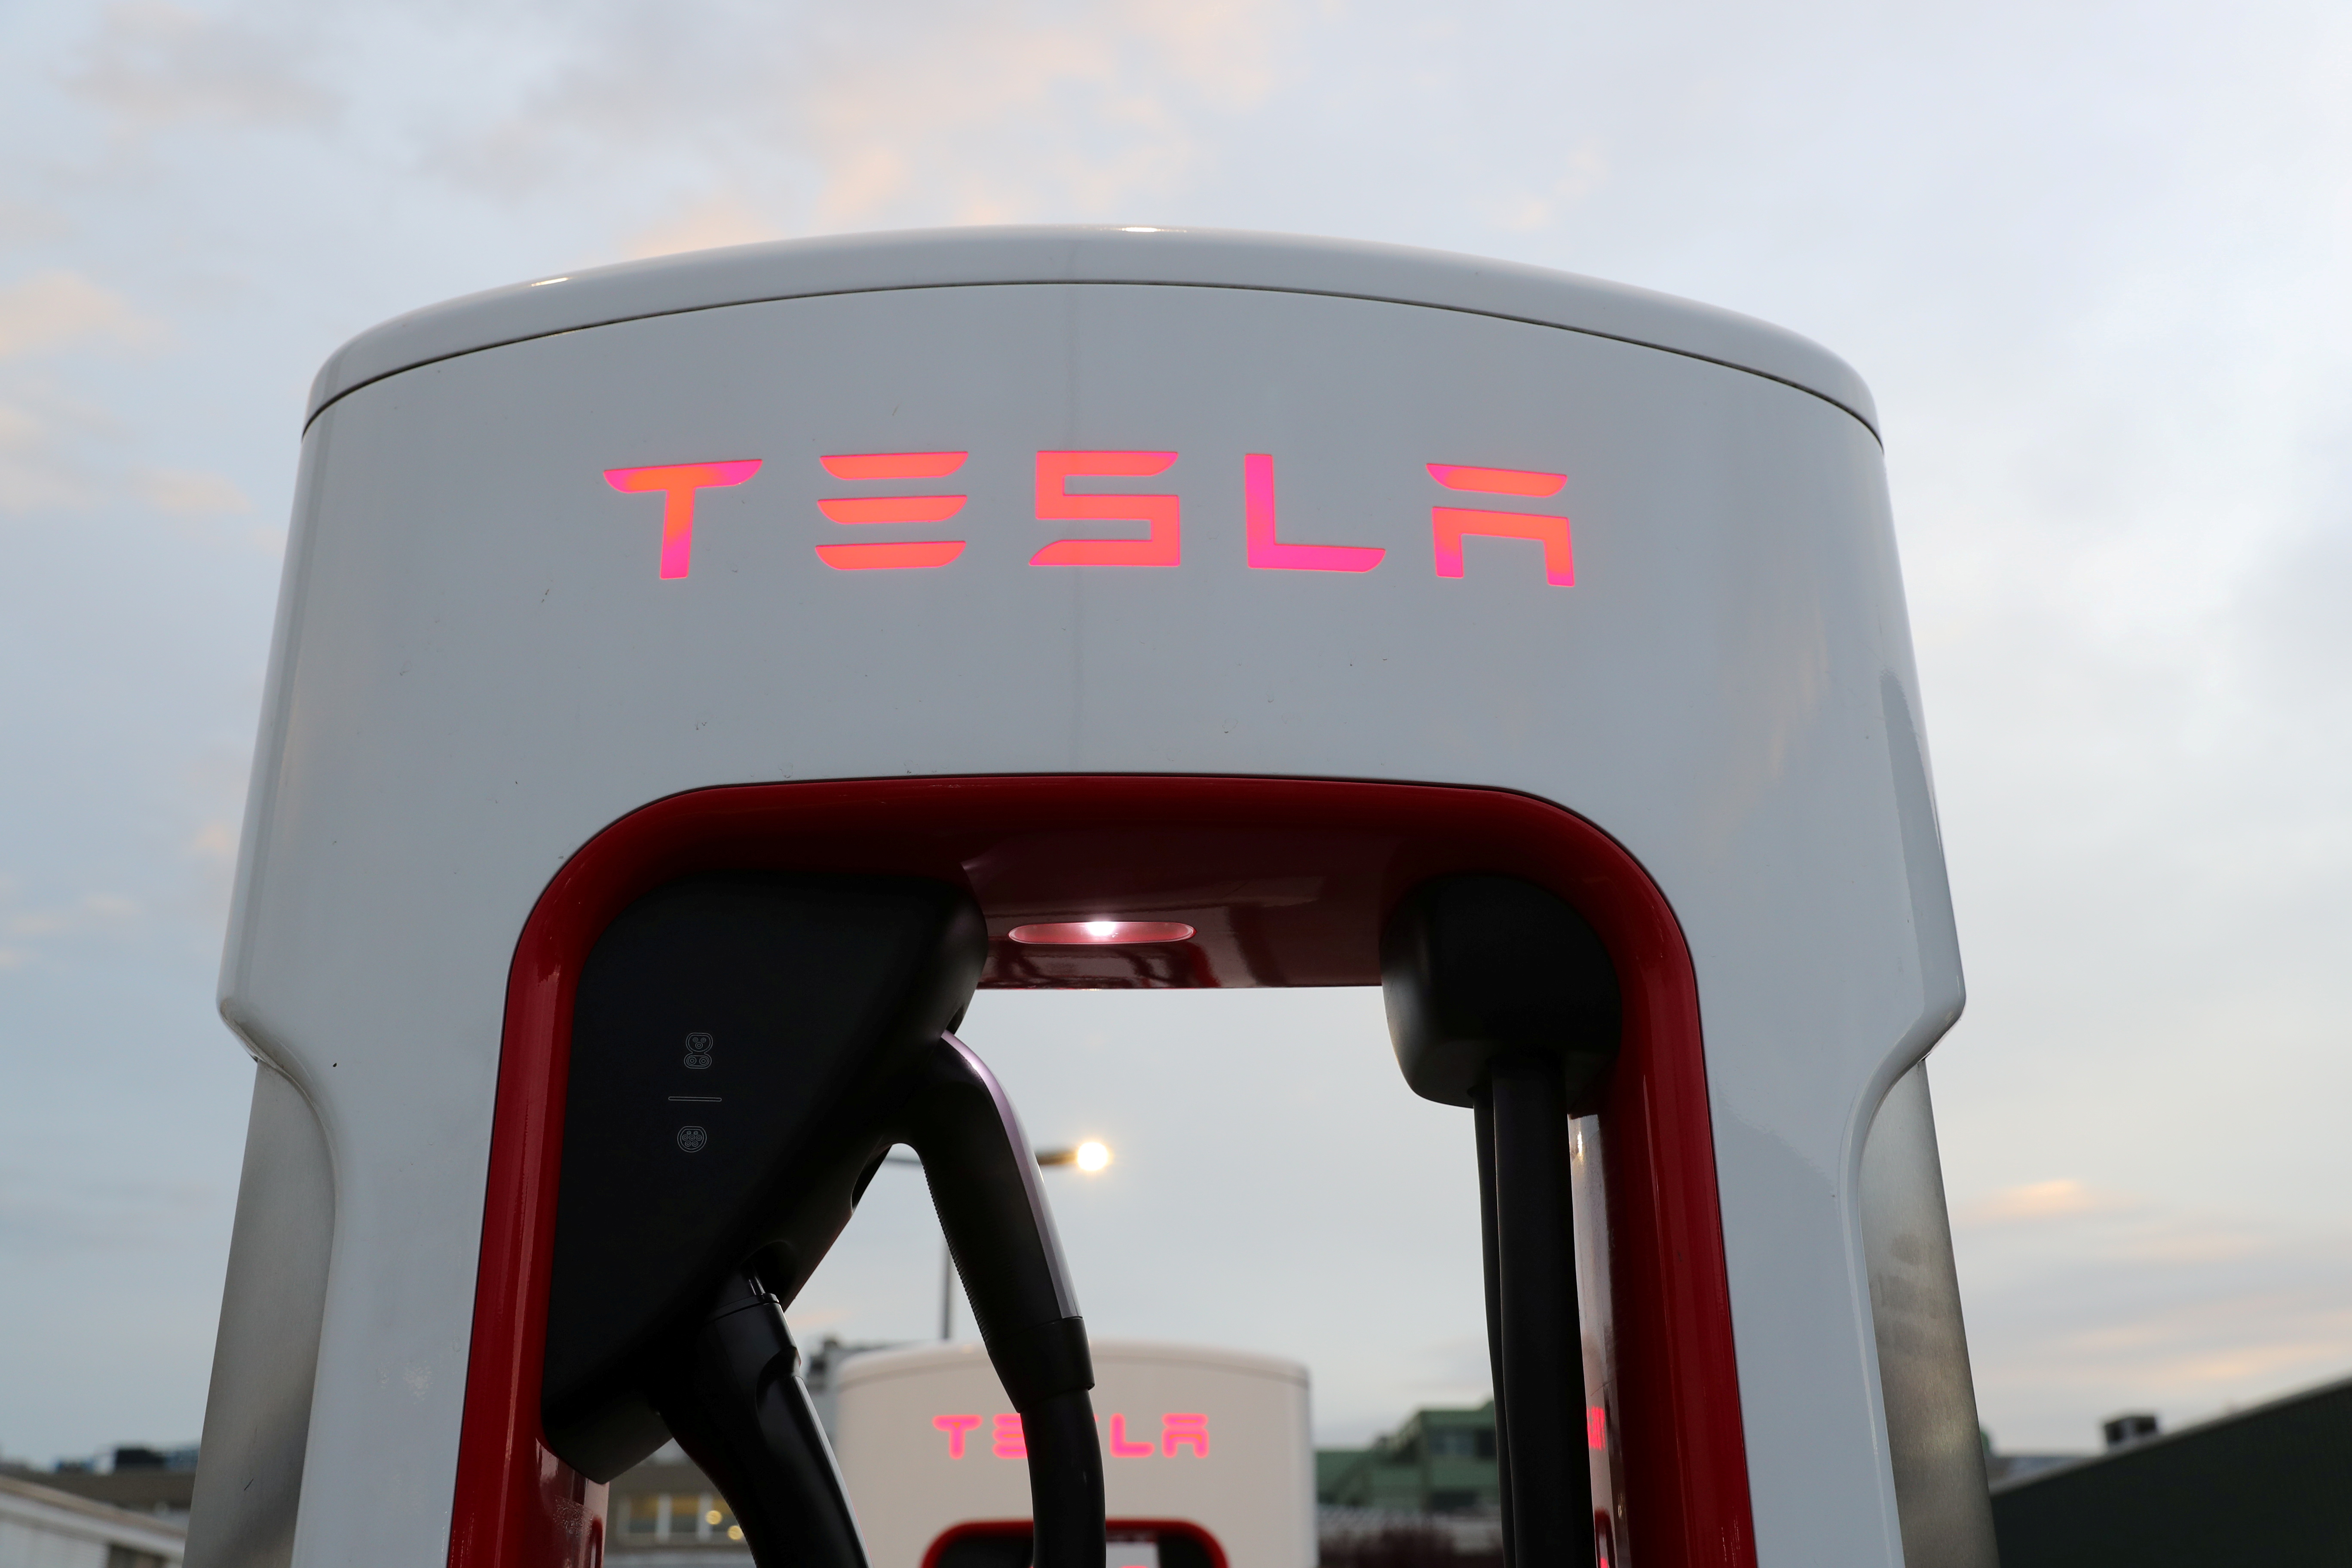 A Tesla Supercharger station is seen in Dietikon